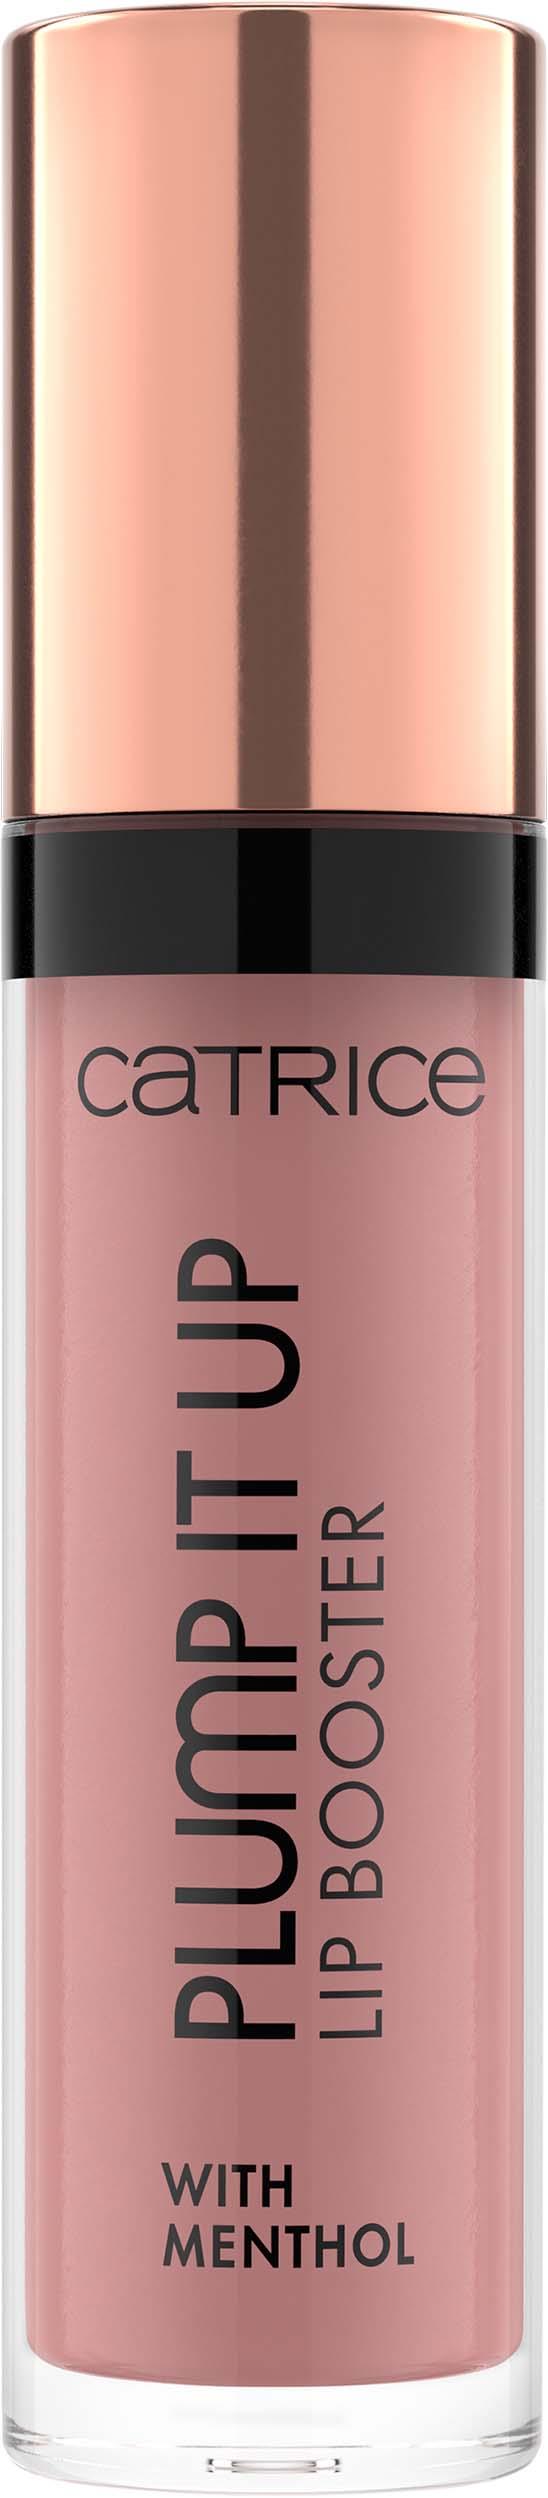 Plump Me Wrong Booster 040 Prove Up Catrice It Lip